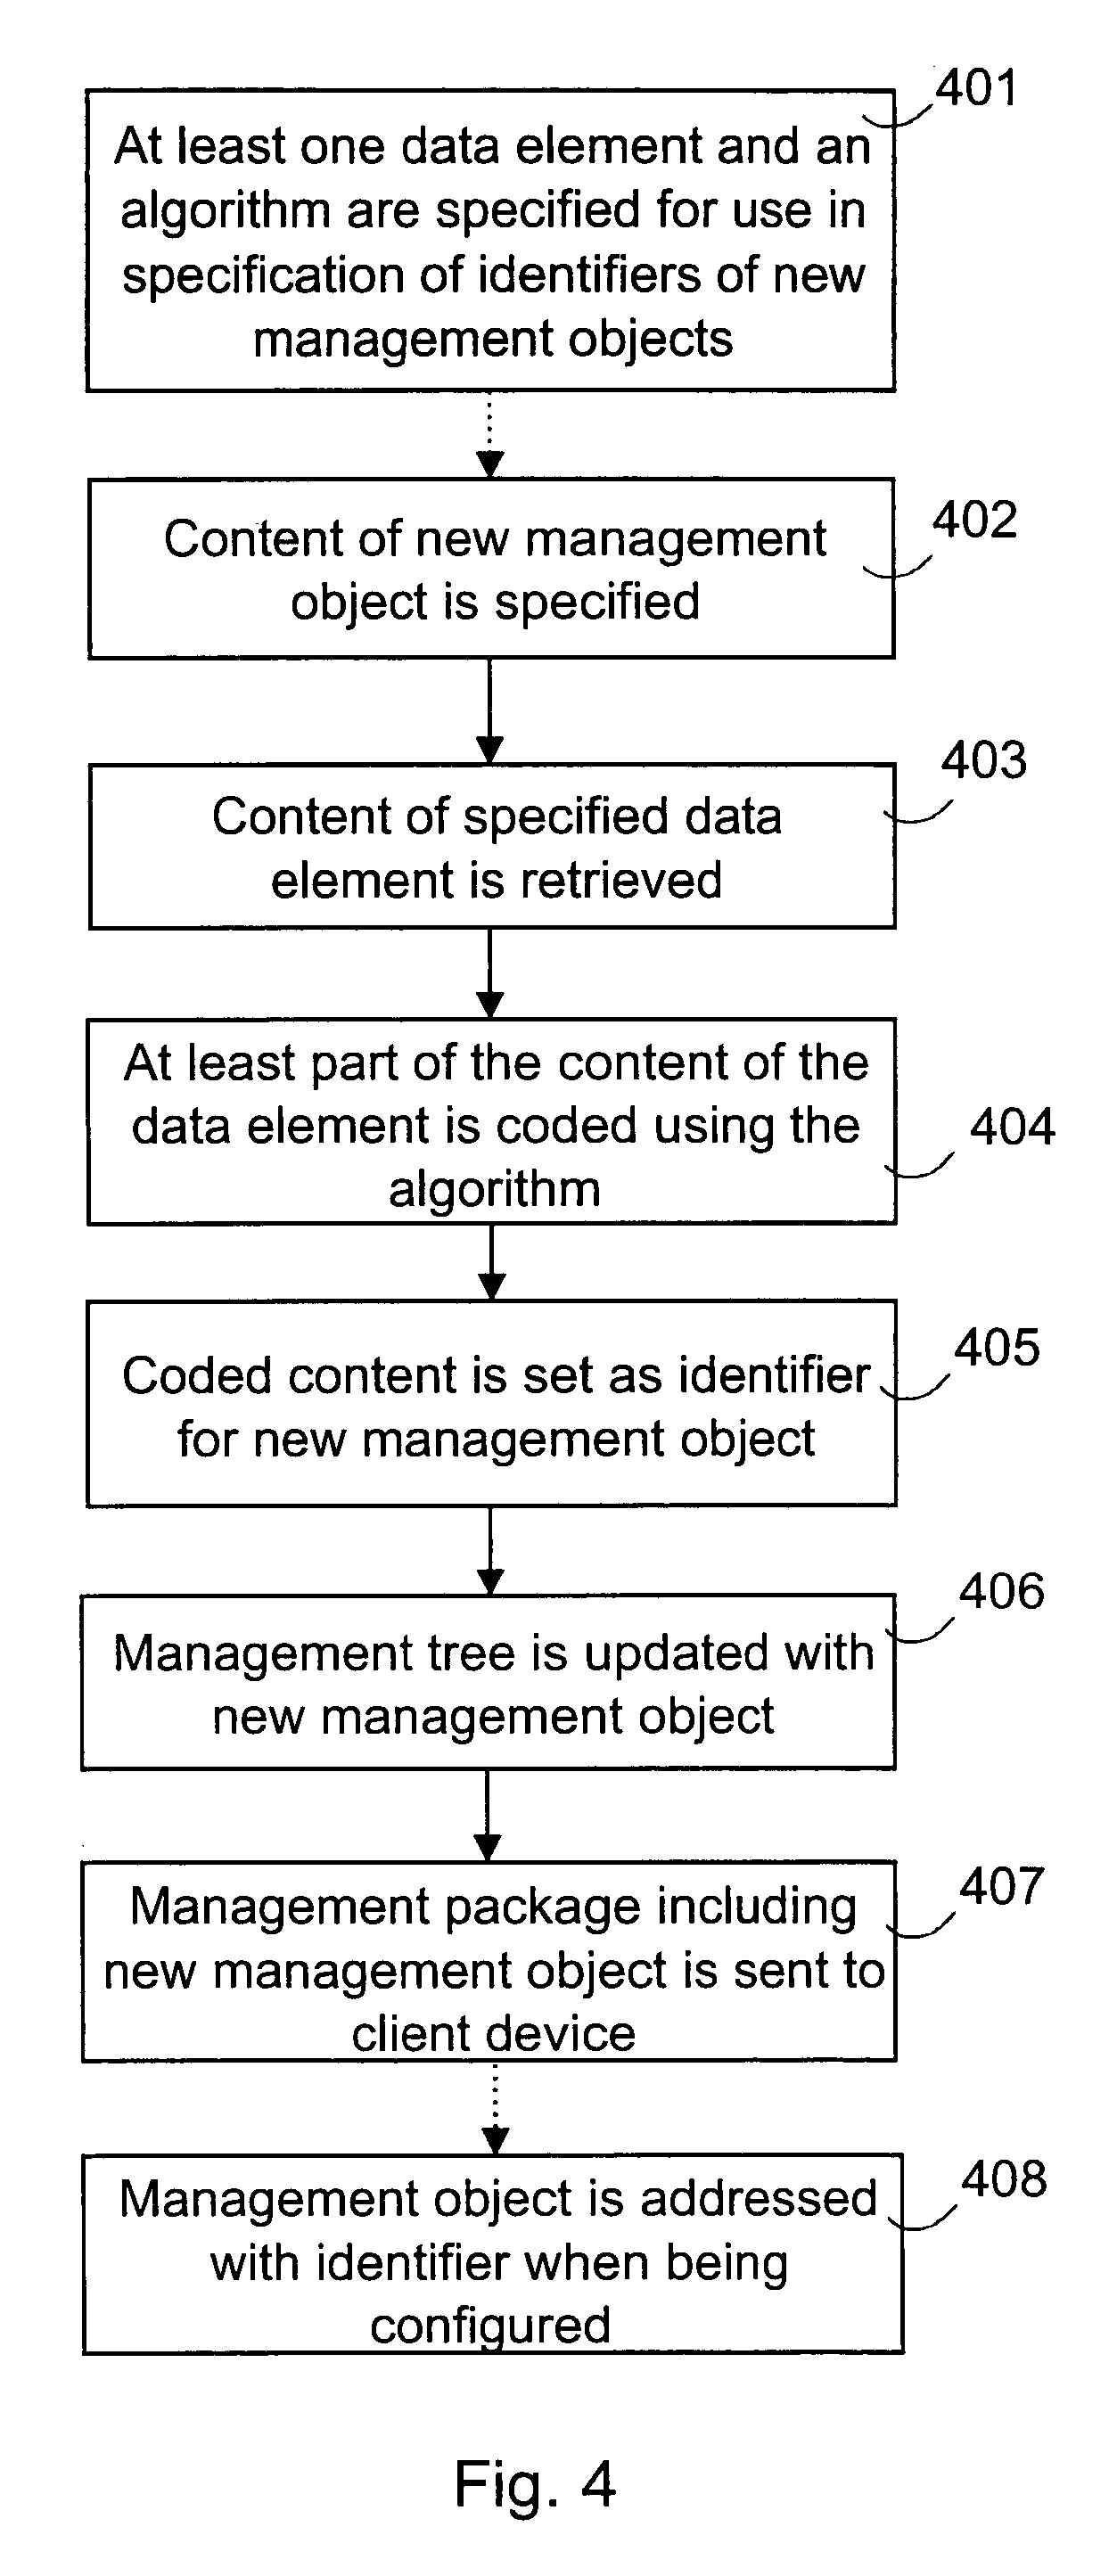 Addressing a management object